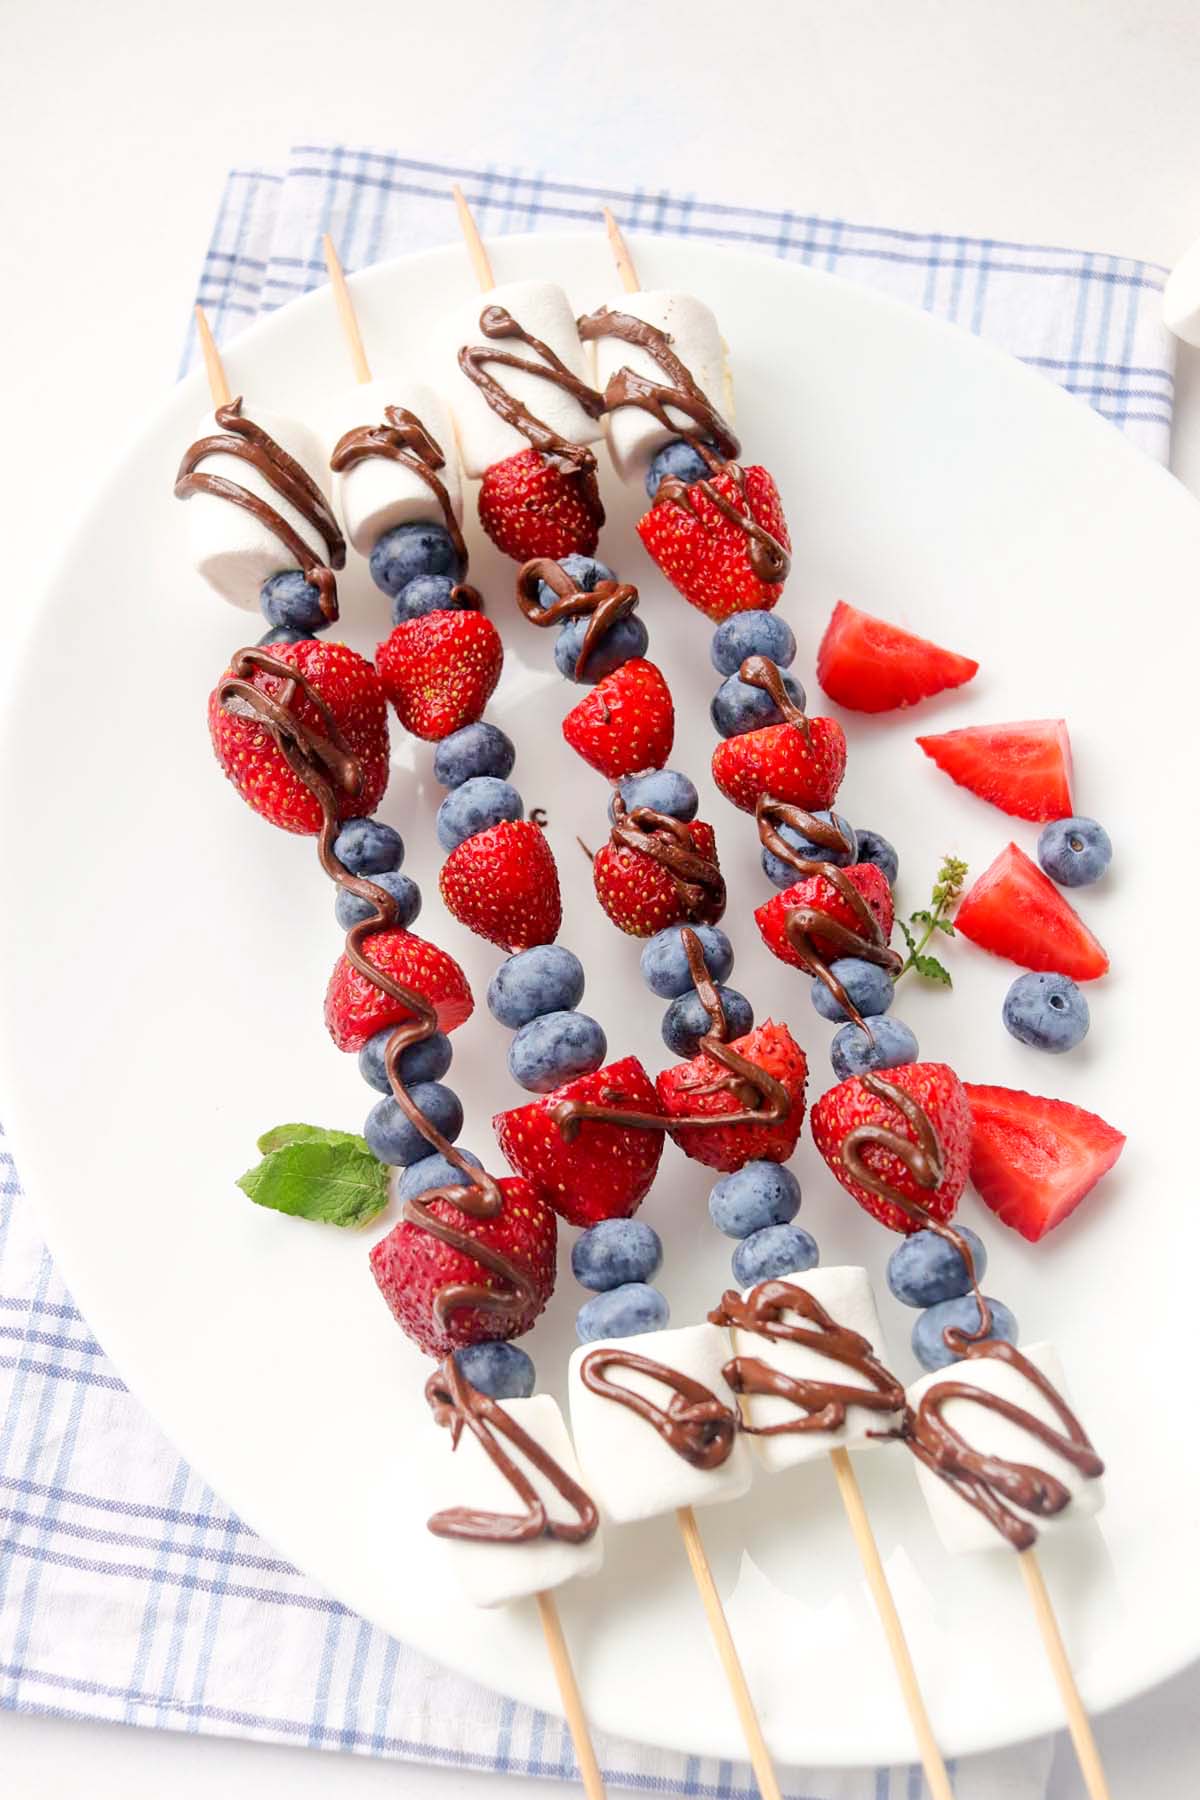 Fruit kabobs drizzled with chocolate.